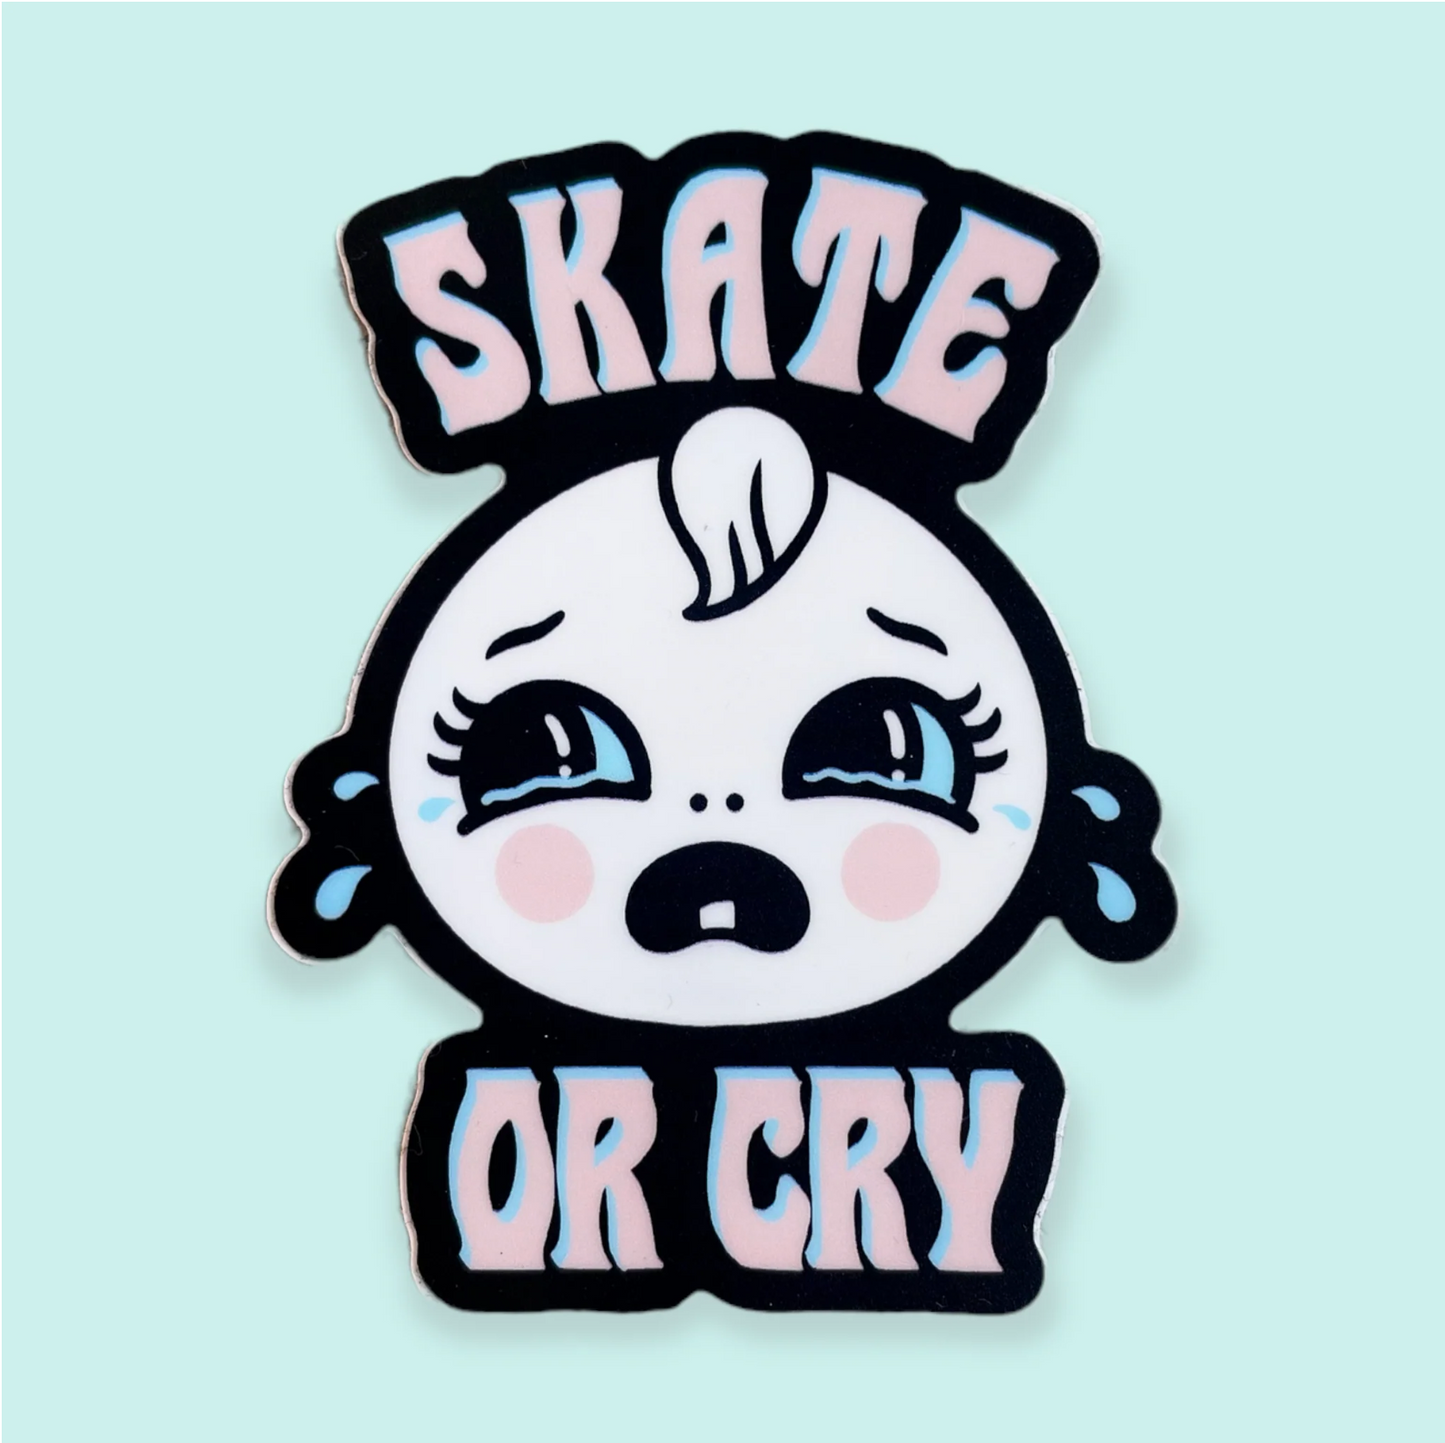 Skate or Cry Vinyl Stickers